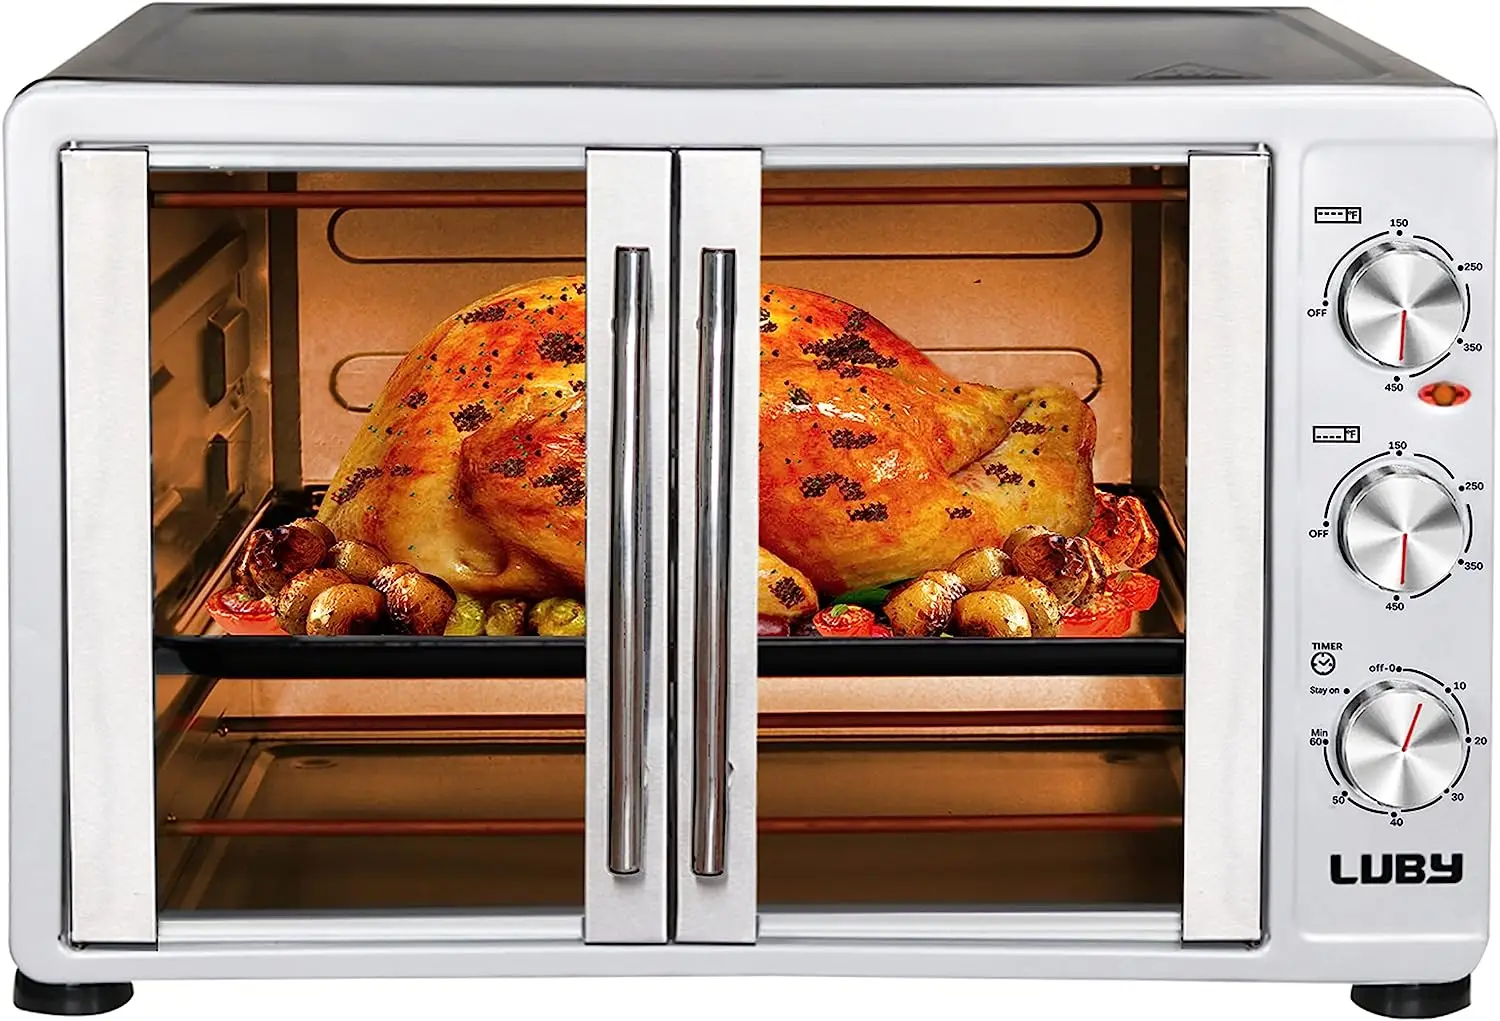 

Large Toaster Oven Countertop, French Door Designed, 55L, 18 Slices, 14'' pizza, 20lb Turkey, Silver